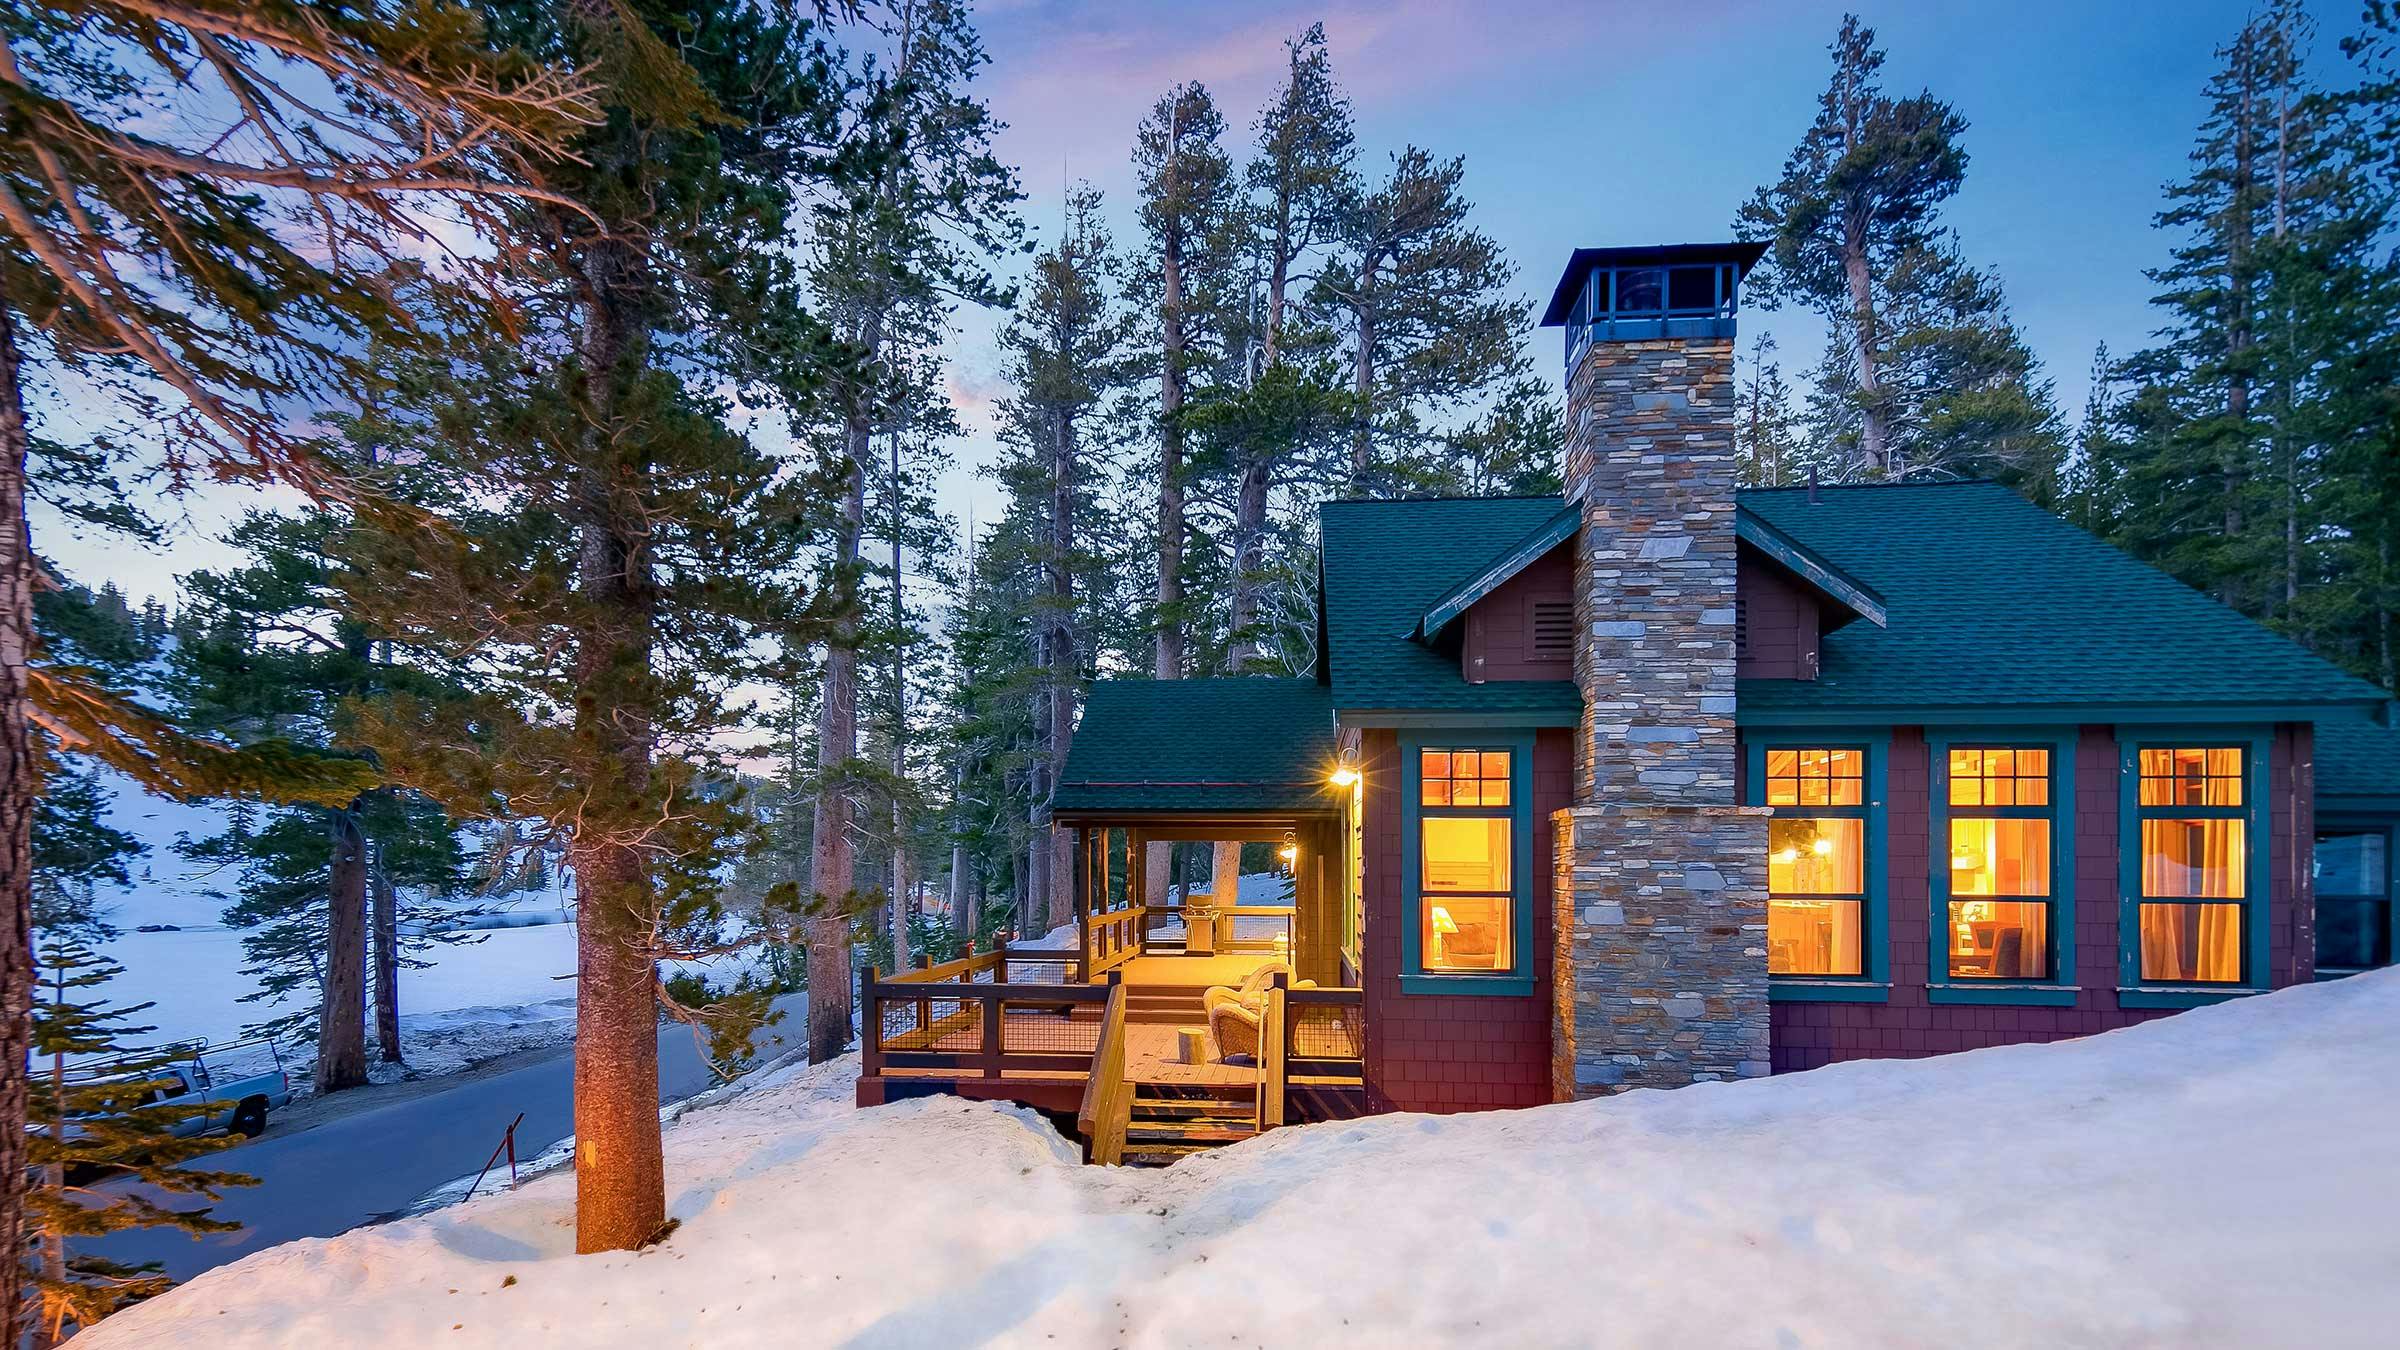 Deluxe cabin at Tamarack at sunset